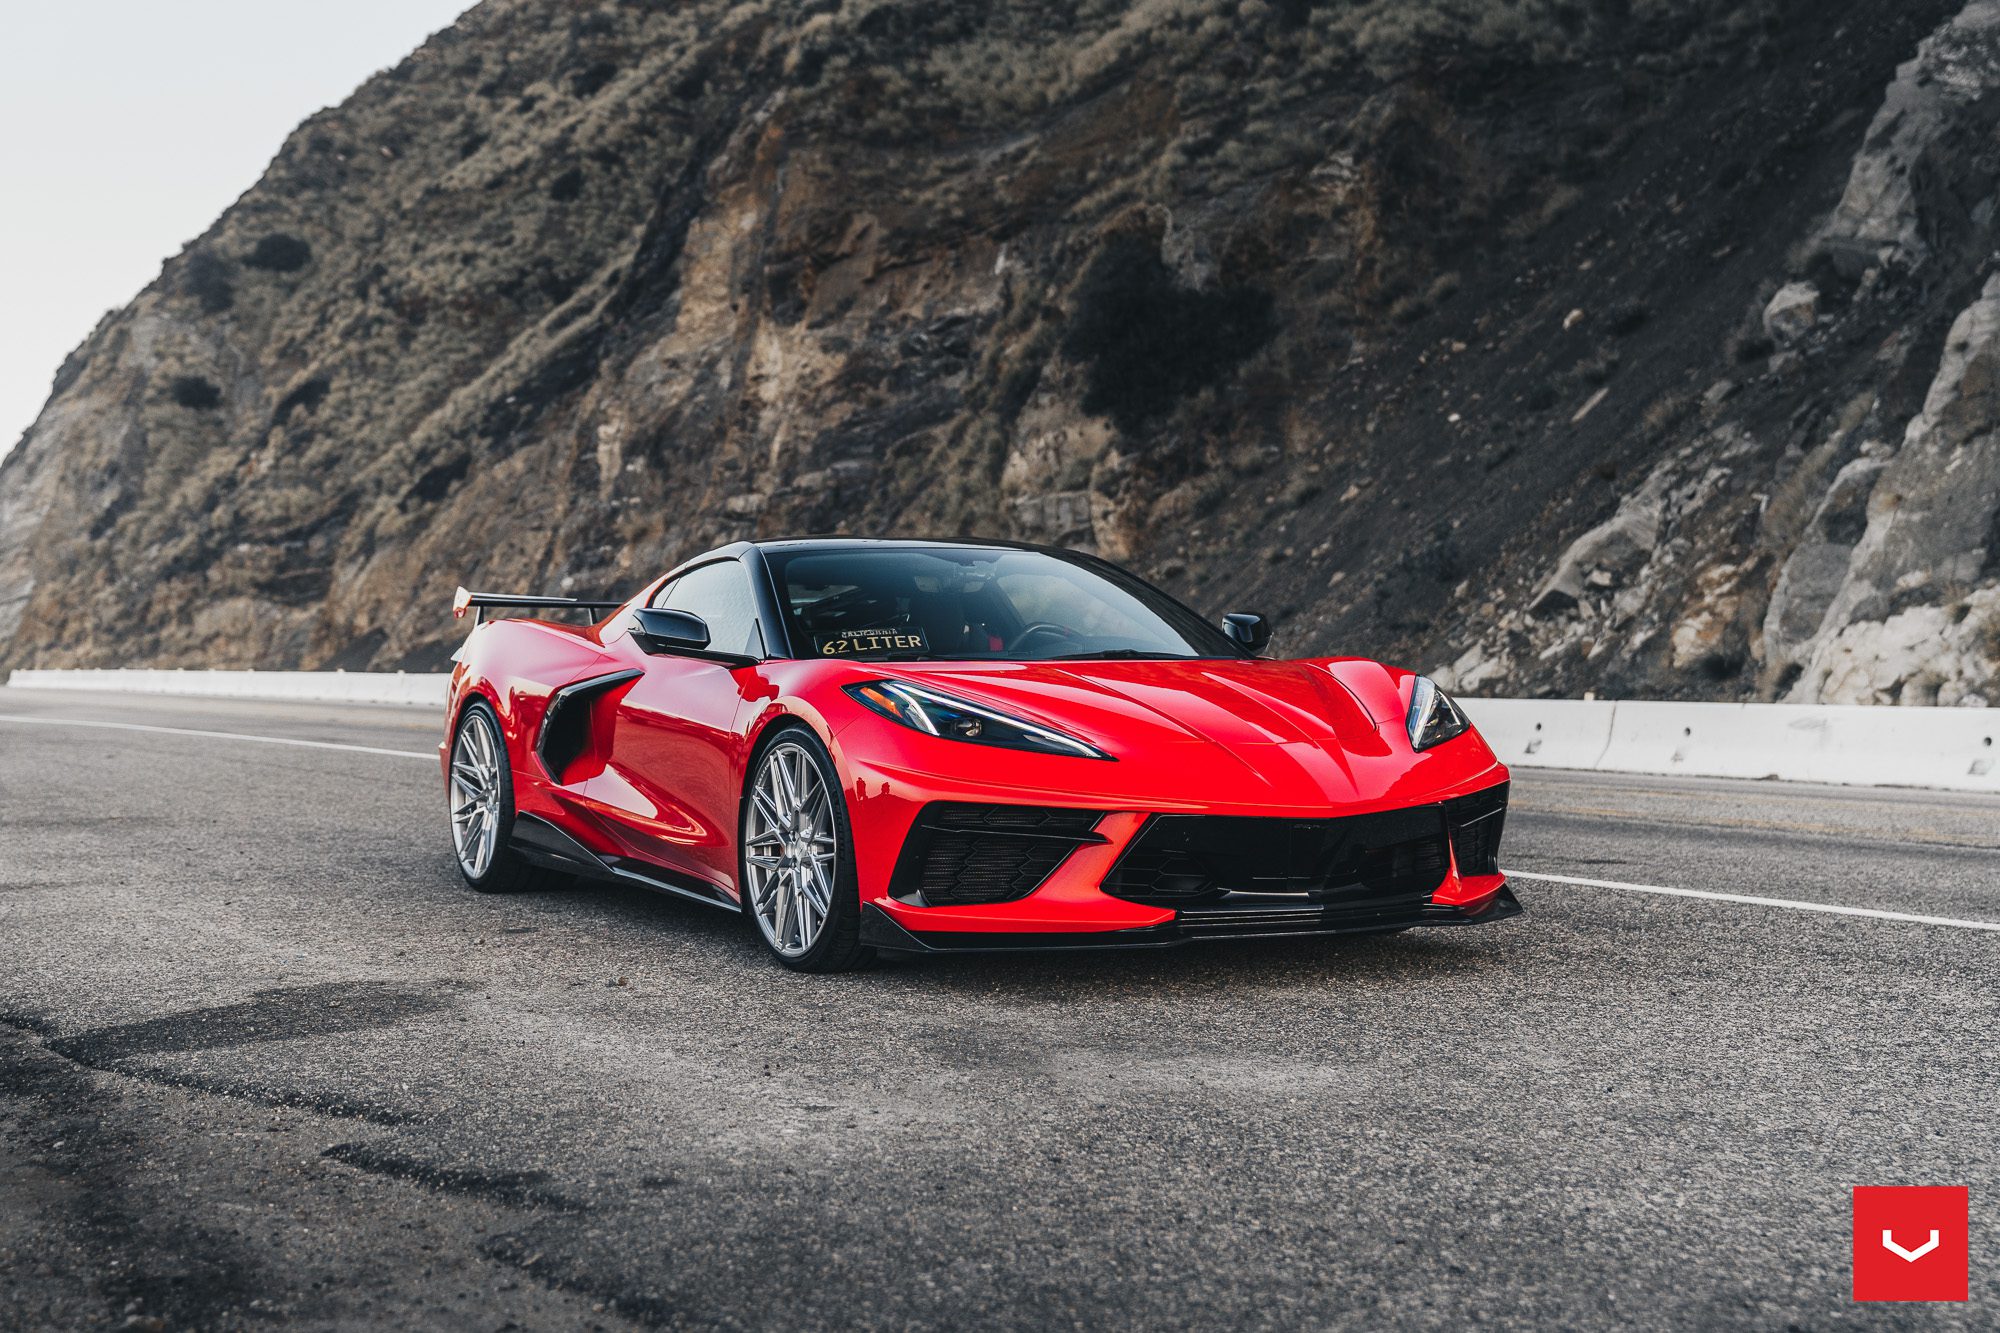 Photoshoot In The Canyons: Torch Red Chevrolet C8 Corvette – Vossen HF-7 Wheels